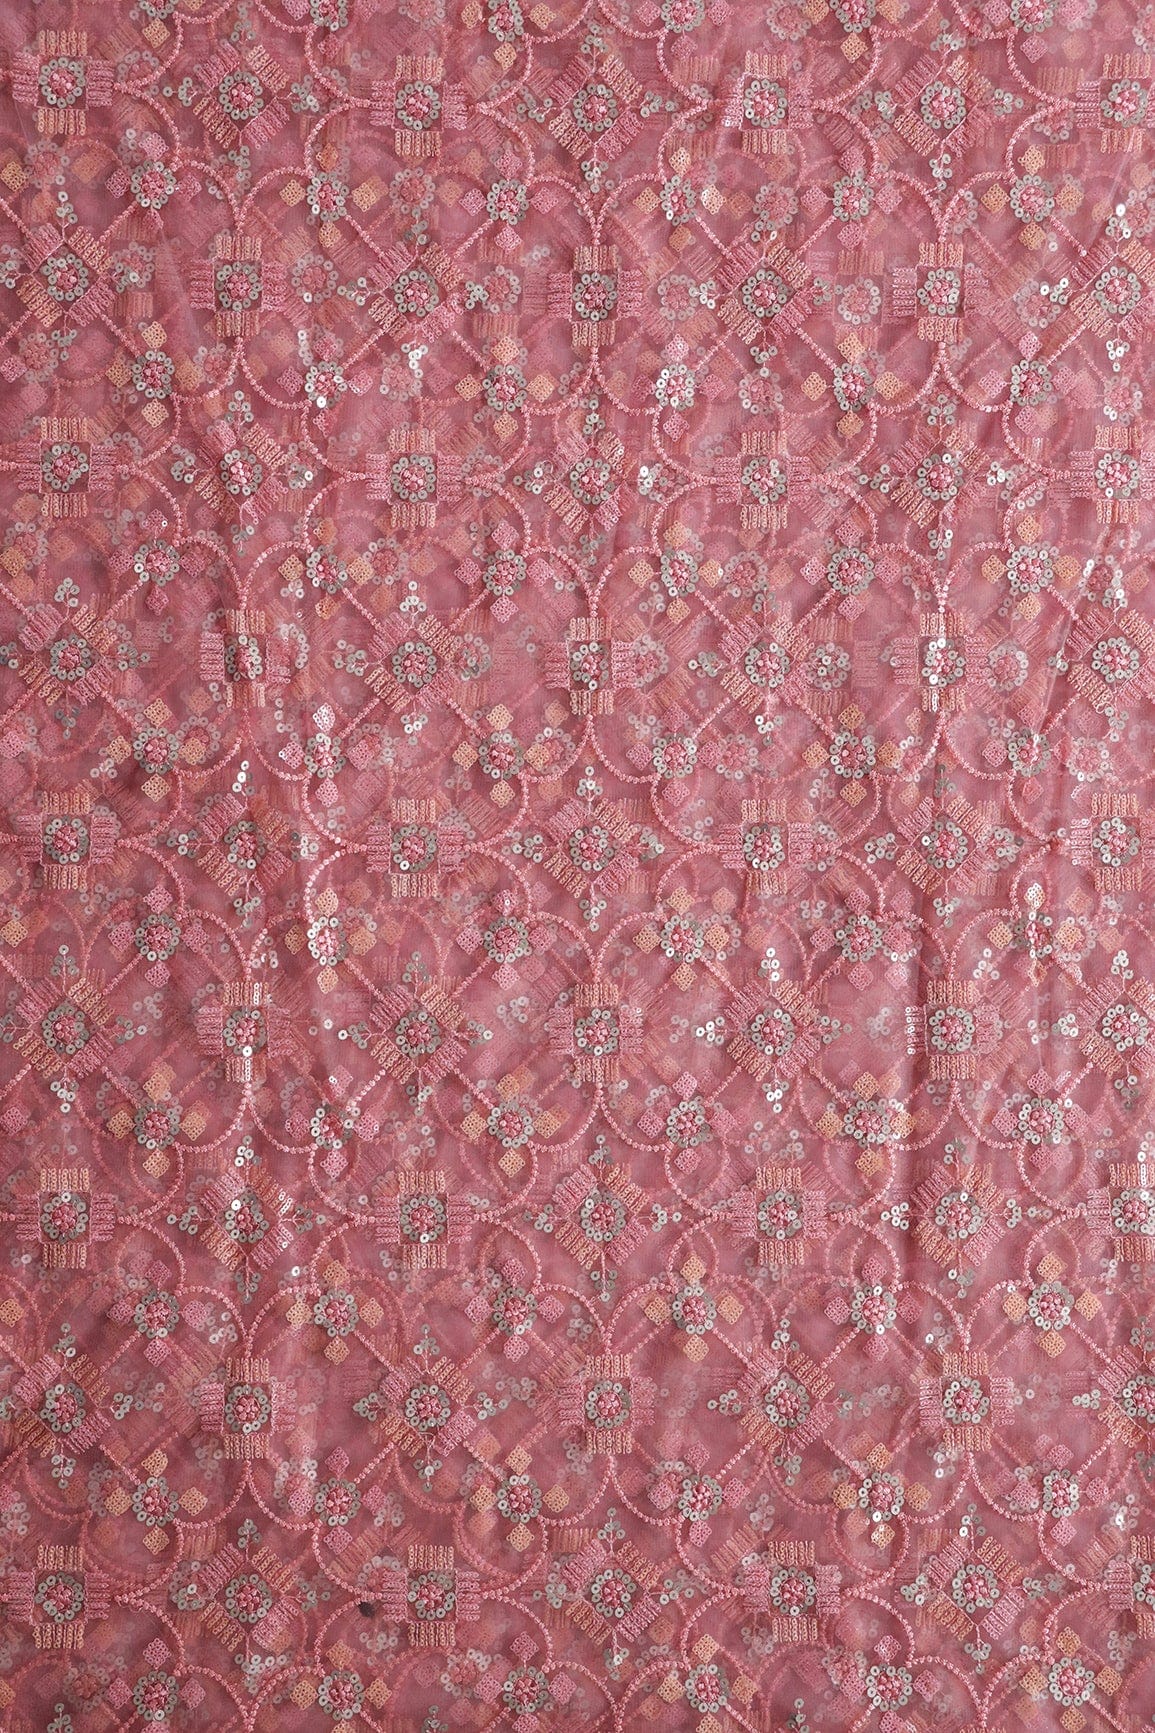 doeraa Embroidery Fabrics Multi Color Sequins With Pink Thread Geometric Embroidery Work On Pink Soft Net Fabric